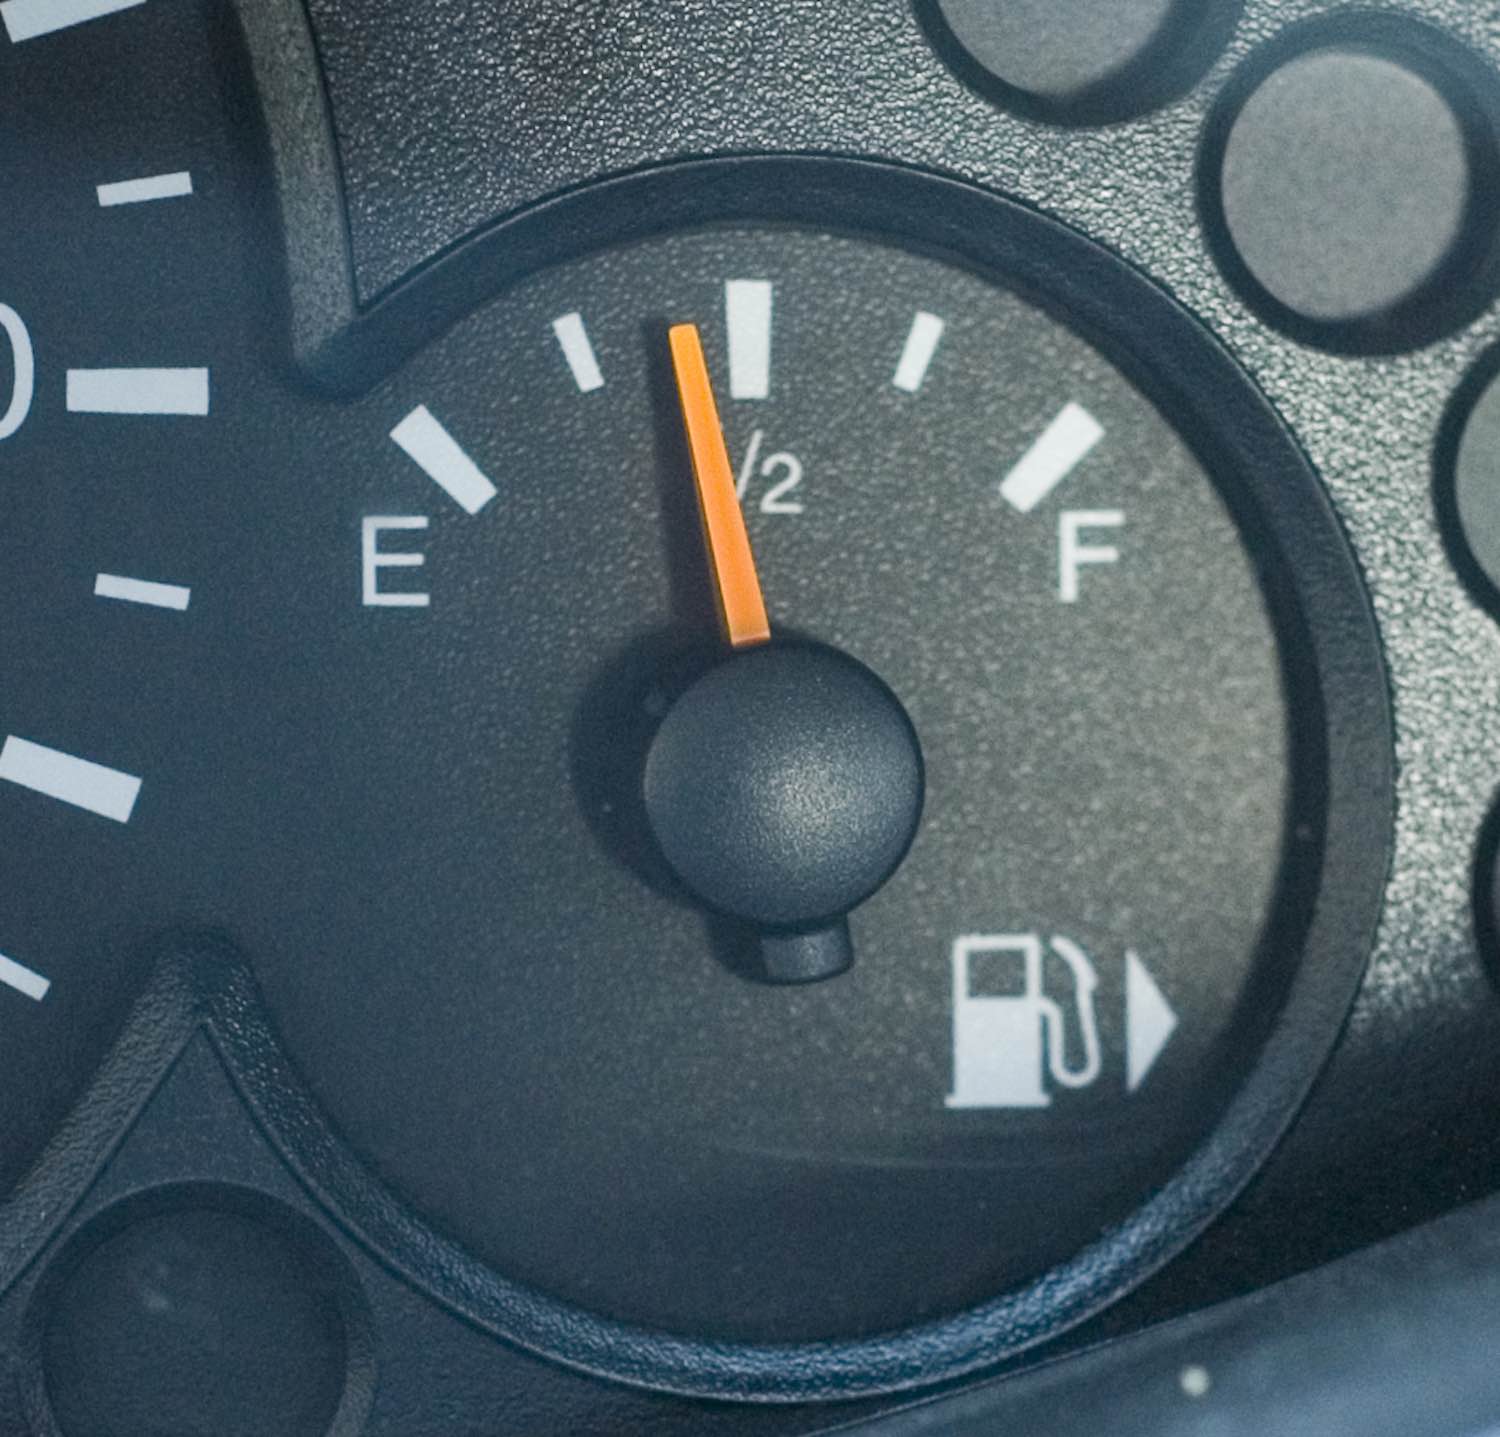 Black fuel gauge with white "E" and "F" letters on either end of the needle.